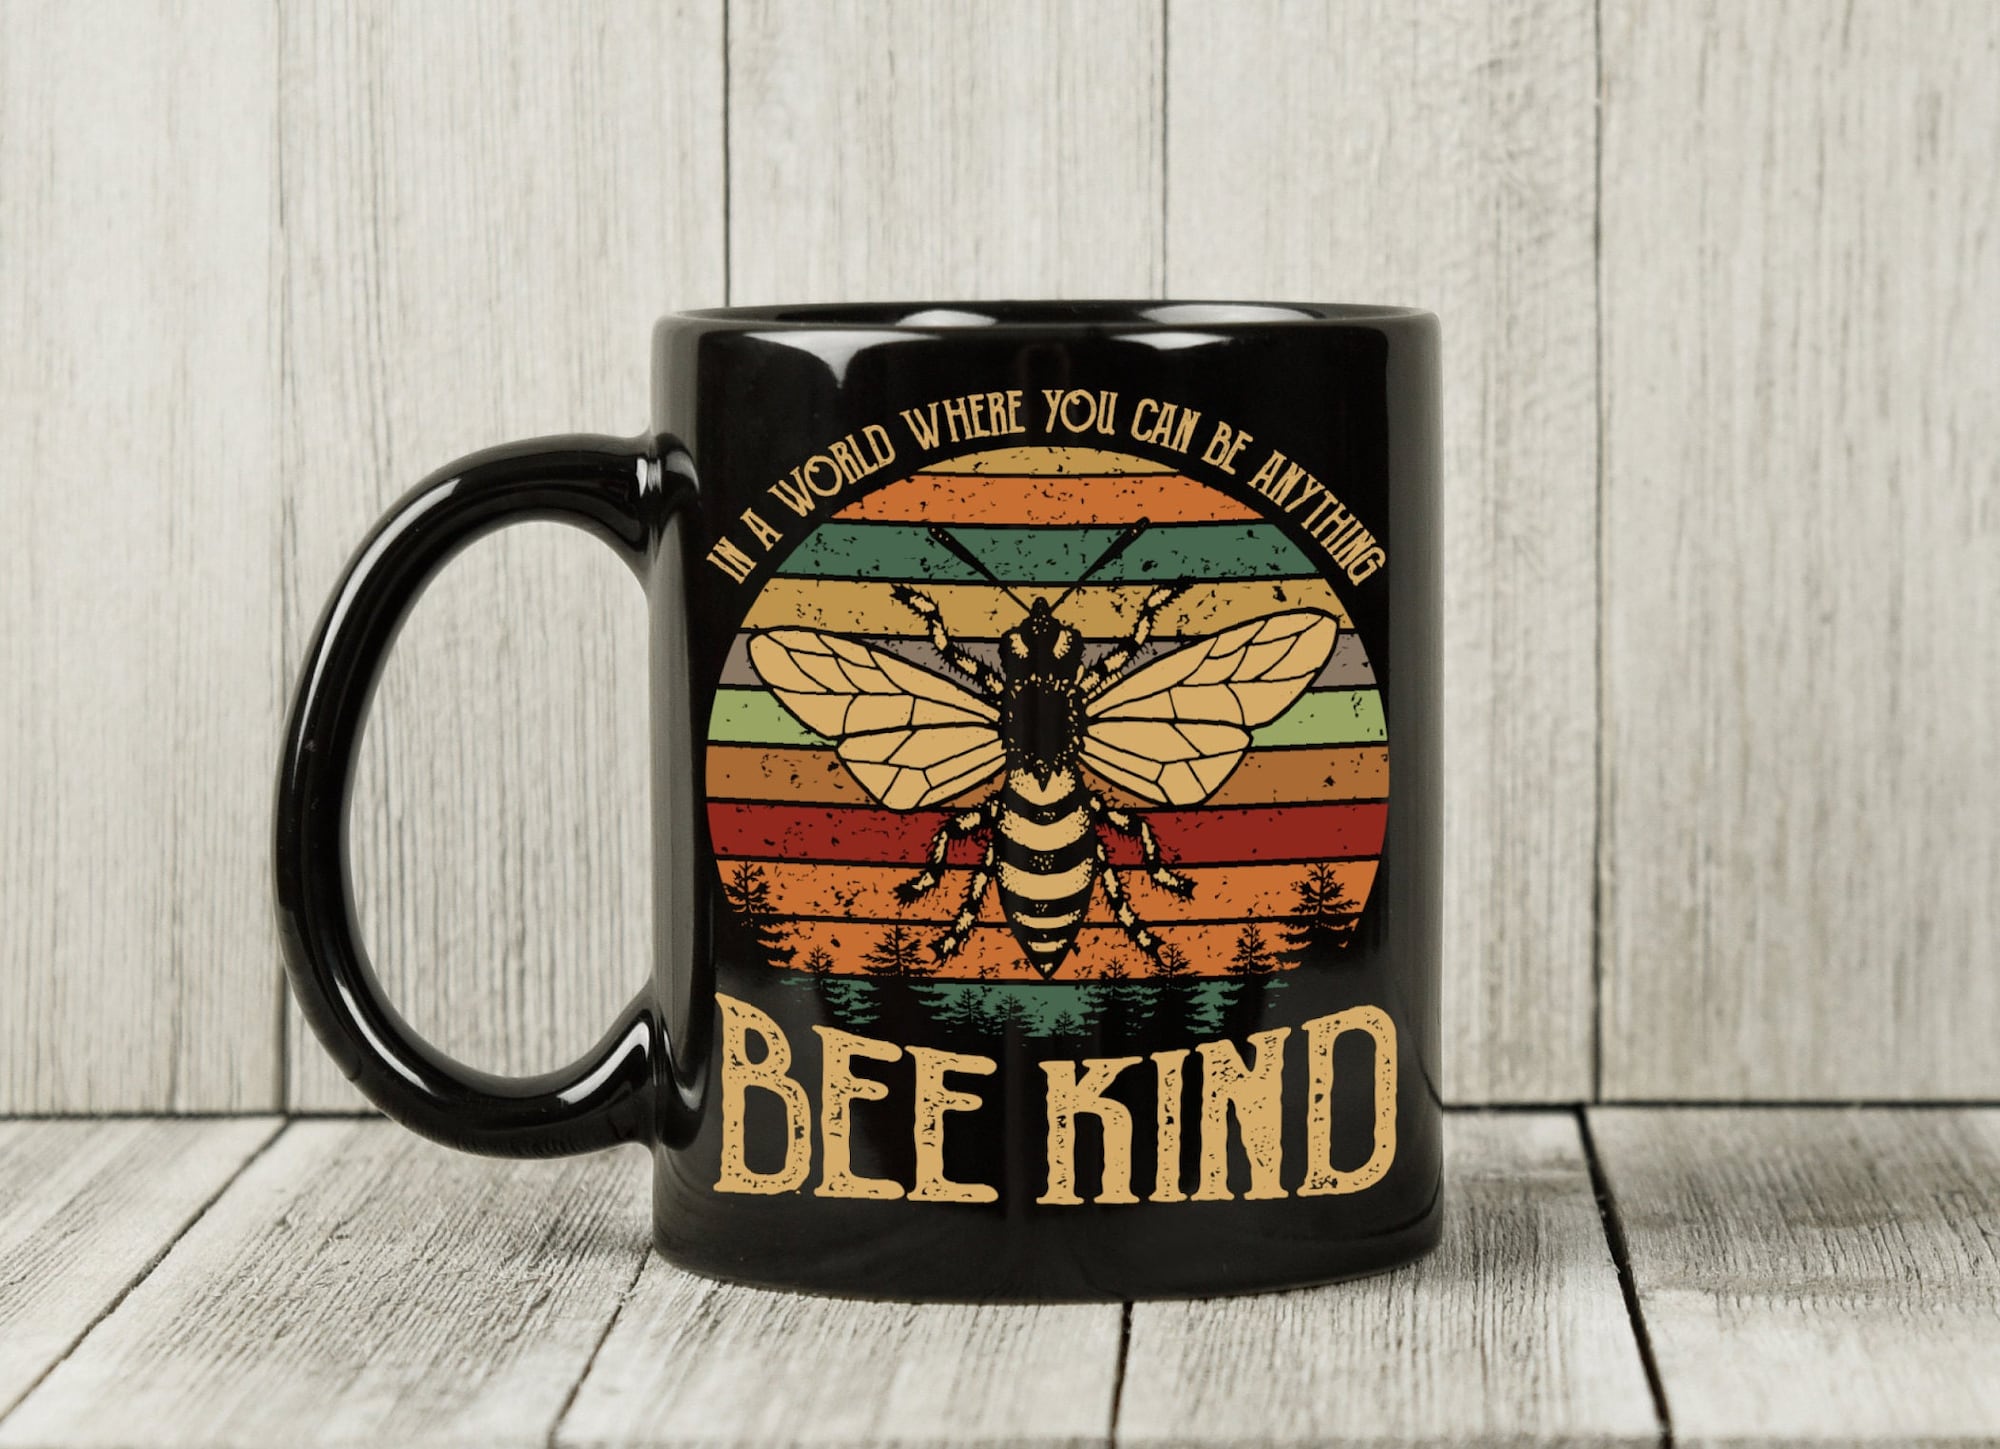 In a World Where You Can Be Anything Bee Kind Mug